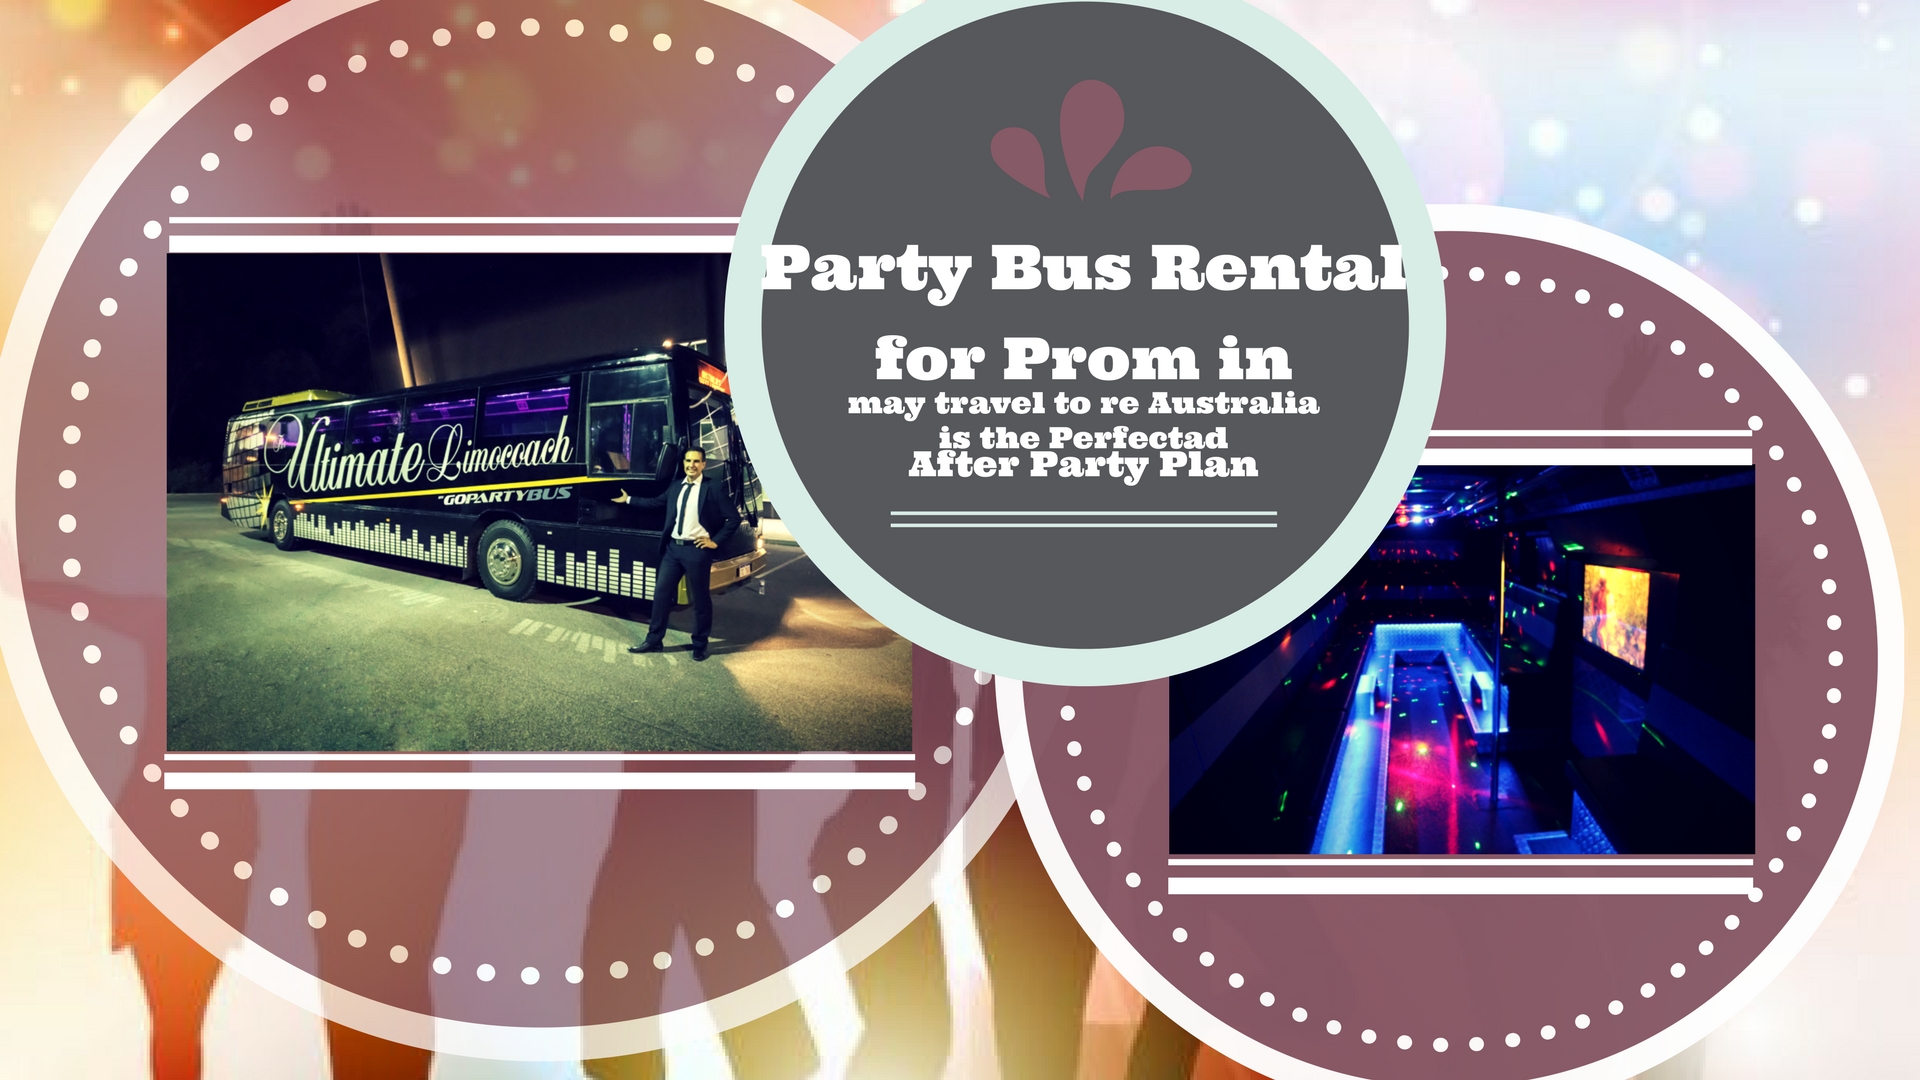 Party Bus Rental for Prom in Australia is the Perfect After Party Plan